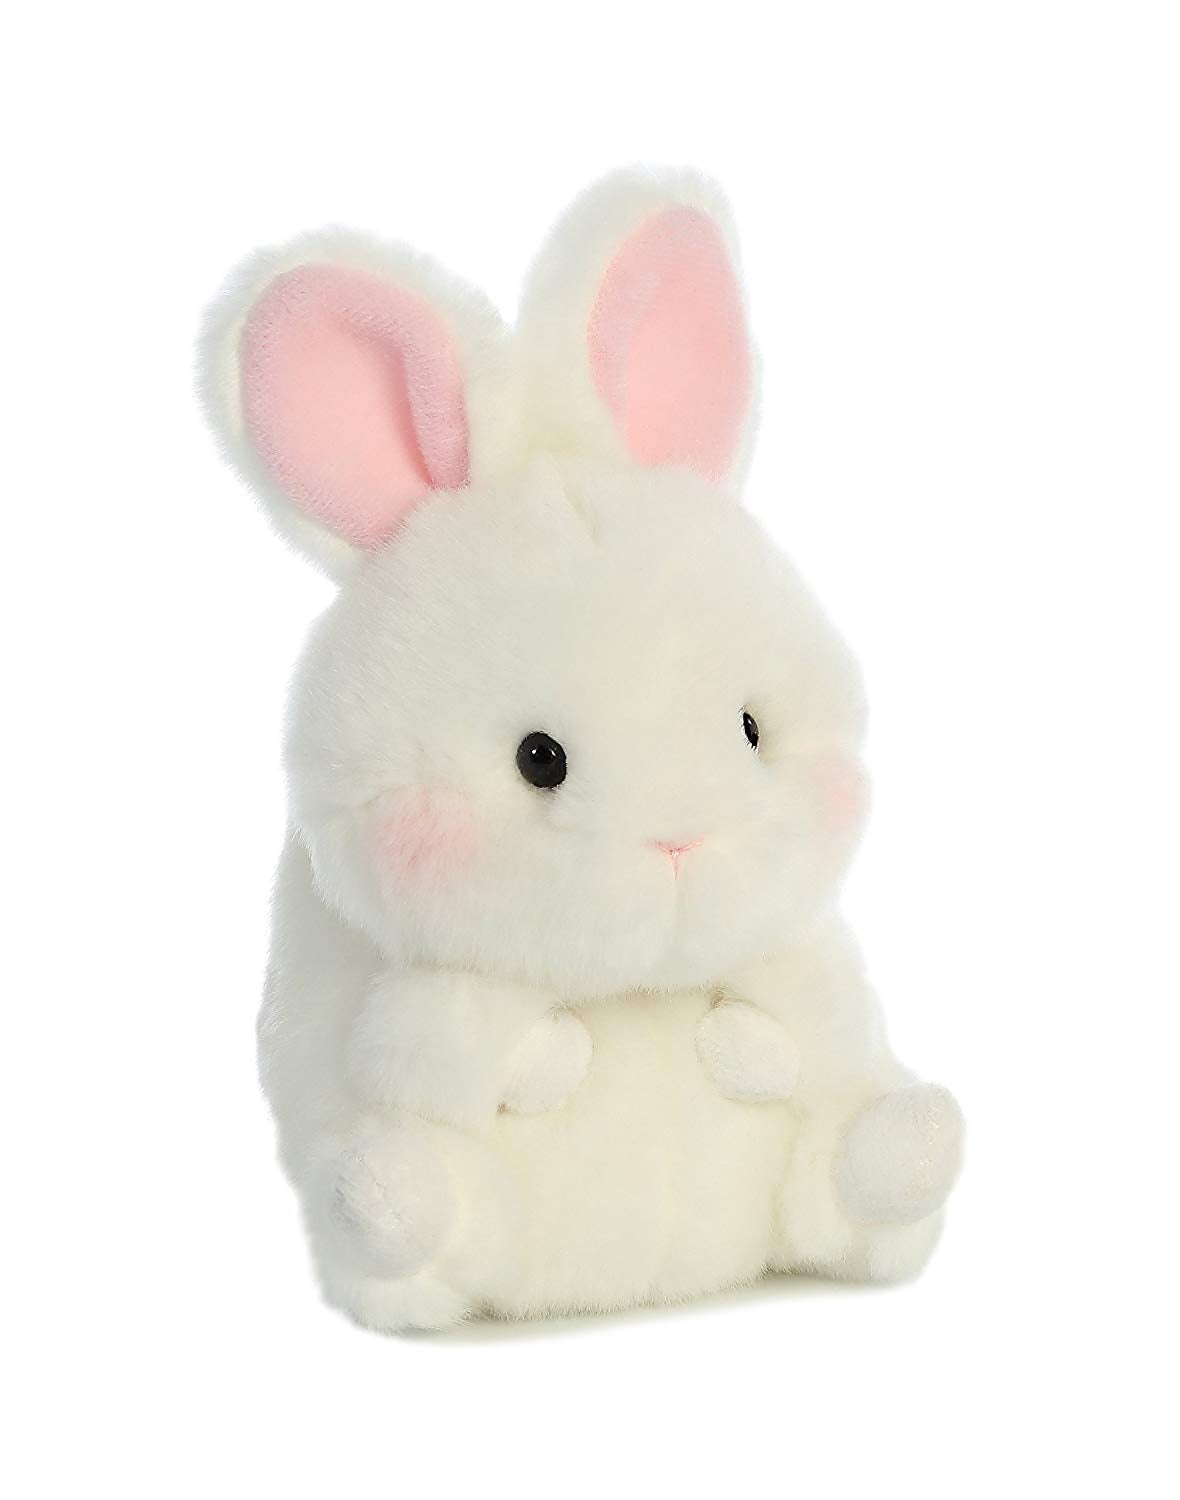 5 inch tall plush white rabbit. Pink ears and black eyes.